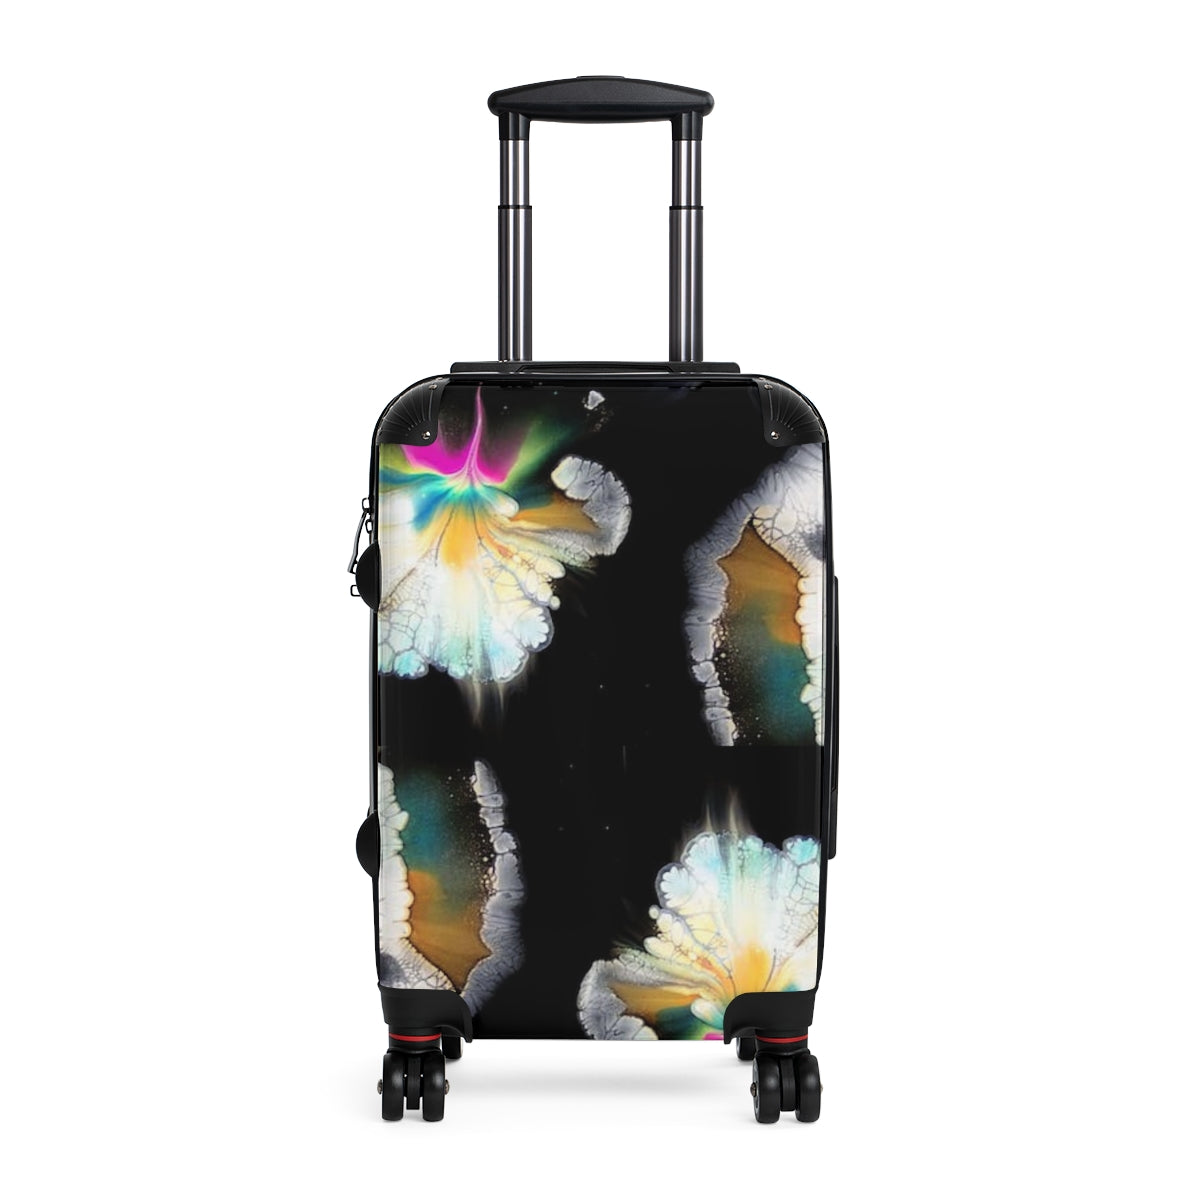 BEST CARRY-ON LUGGAGE SET, ABSTRACT ART CABIN SUITCASES BY ARTZIRA, FLORAL CABIN SUITCASE FOR GIRLS, WOMEN, GIFT FOR BRIDESMAIDS, GIFT FOR MOTHERS, DOUBLE WHEELED SPINNER